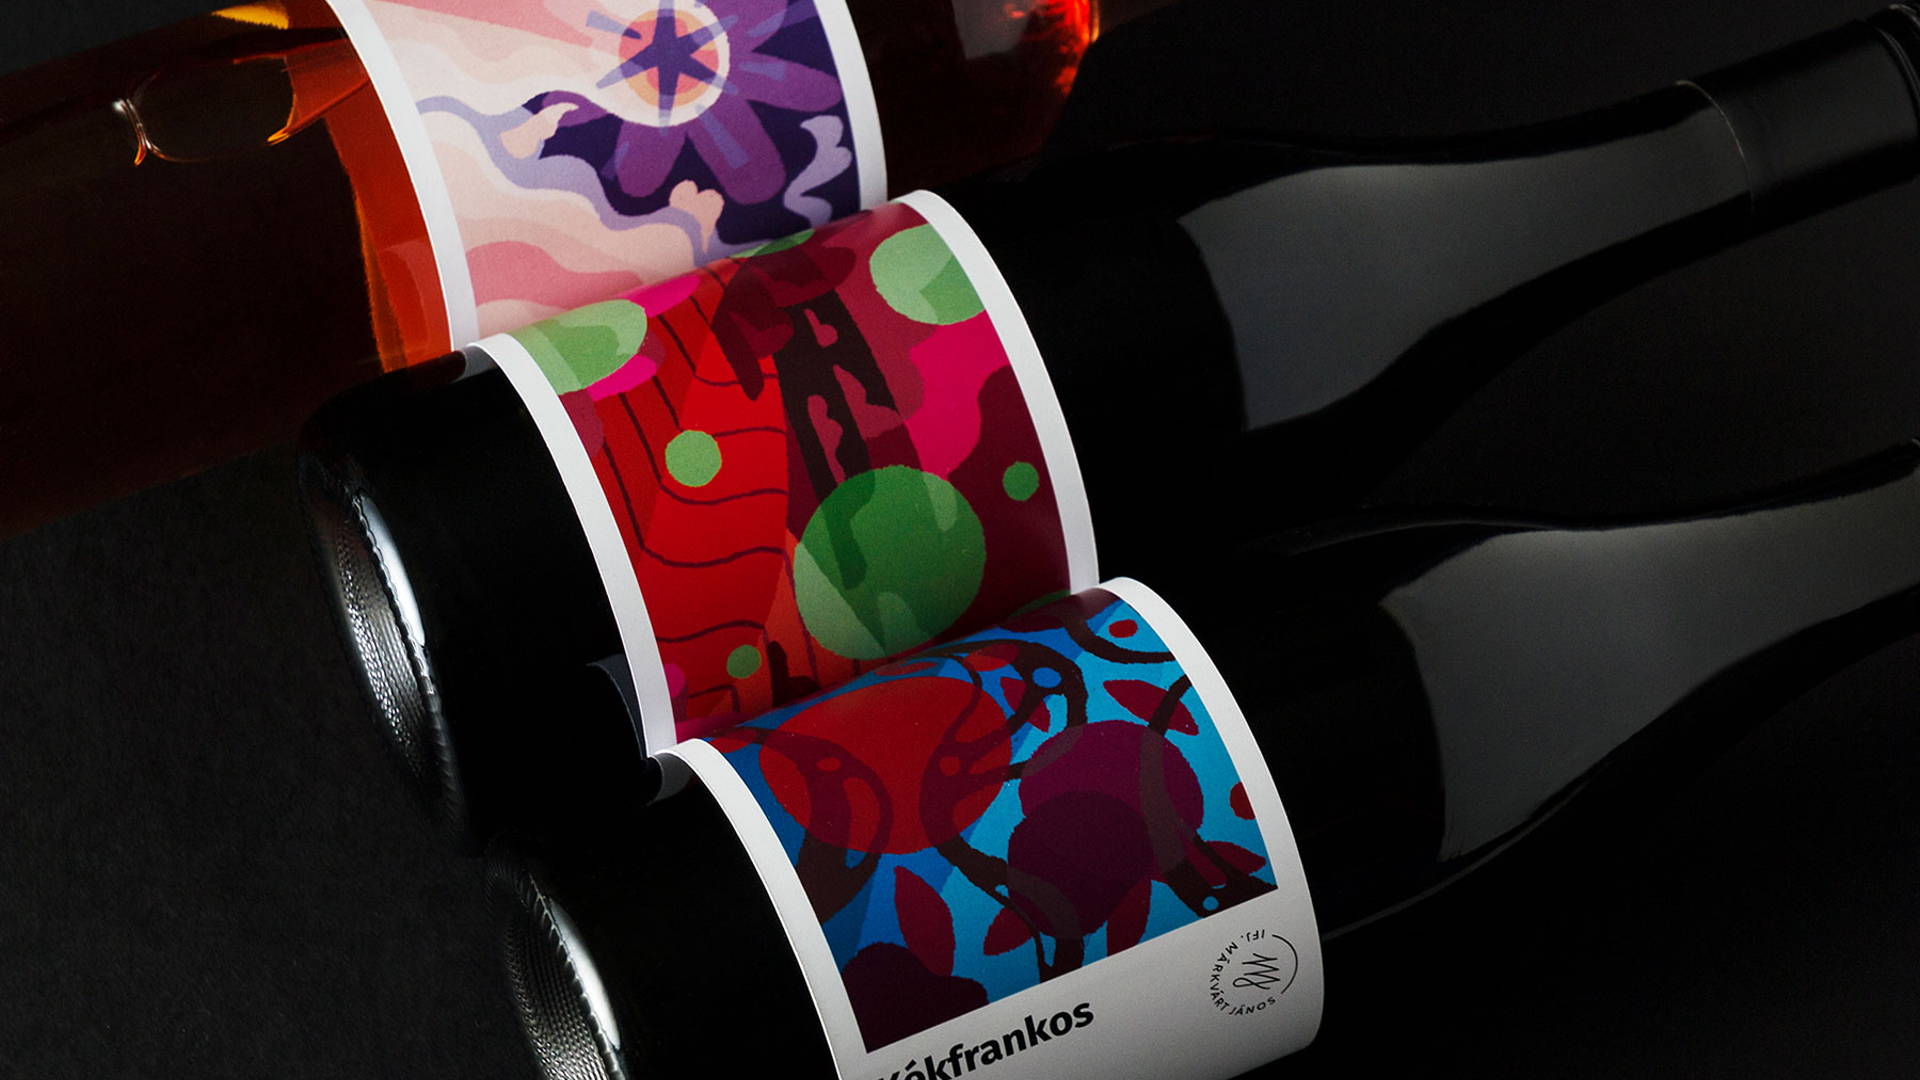 Featured image for This Wine Label Comes With Seriously Striking Illustrations